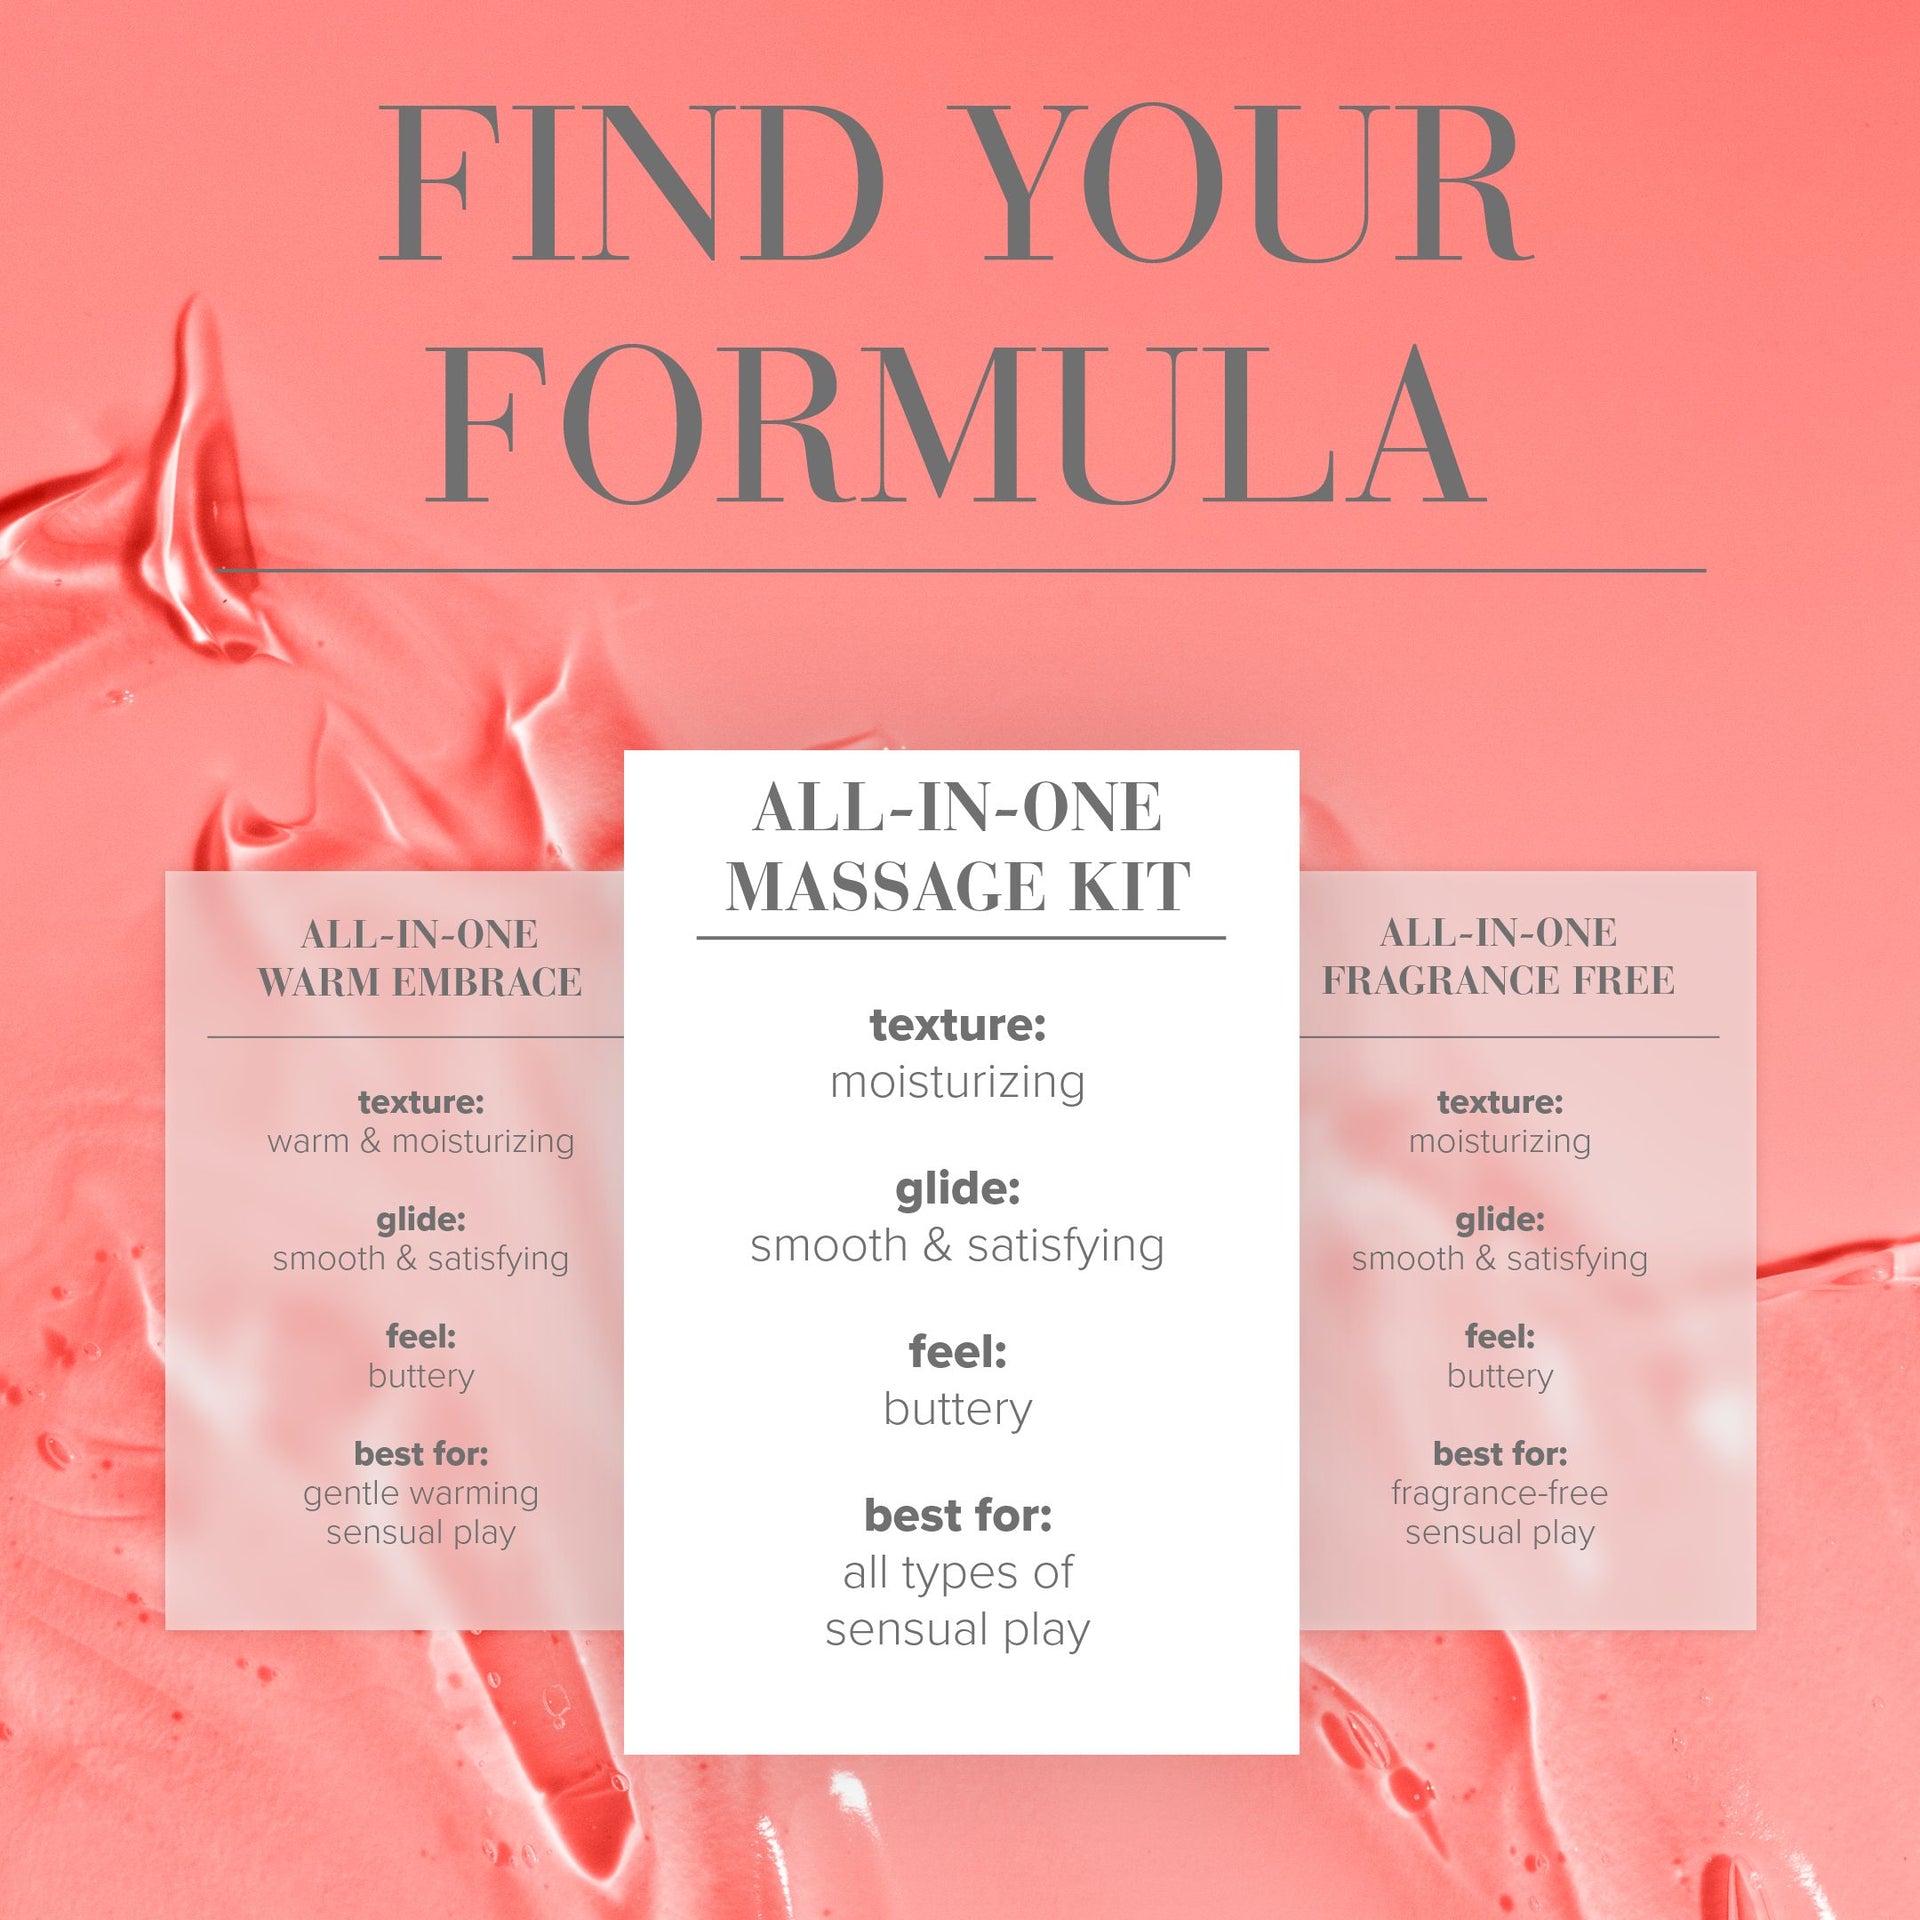 All-In-One Massage Kit